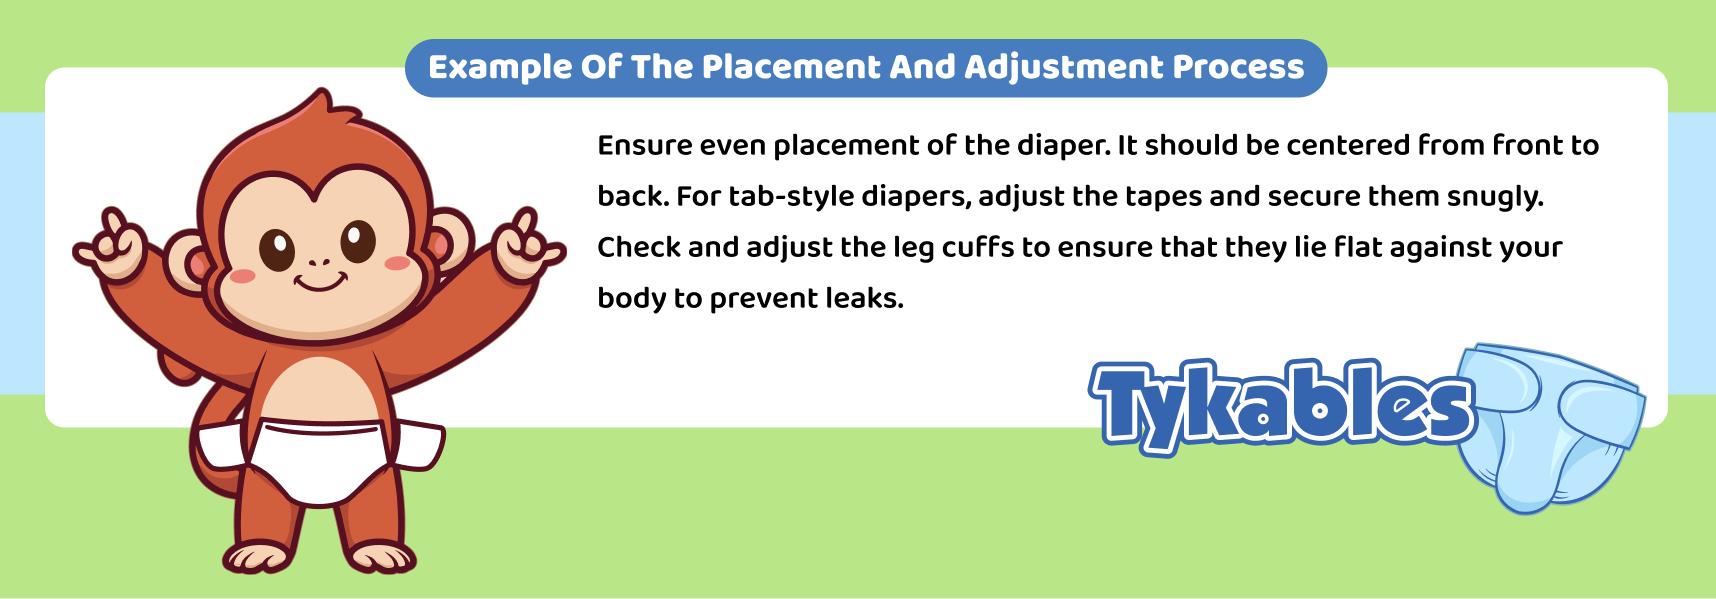 Infographic that provides insights around proper placement and adjustment of a diaper after it has been put on.